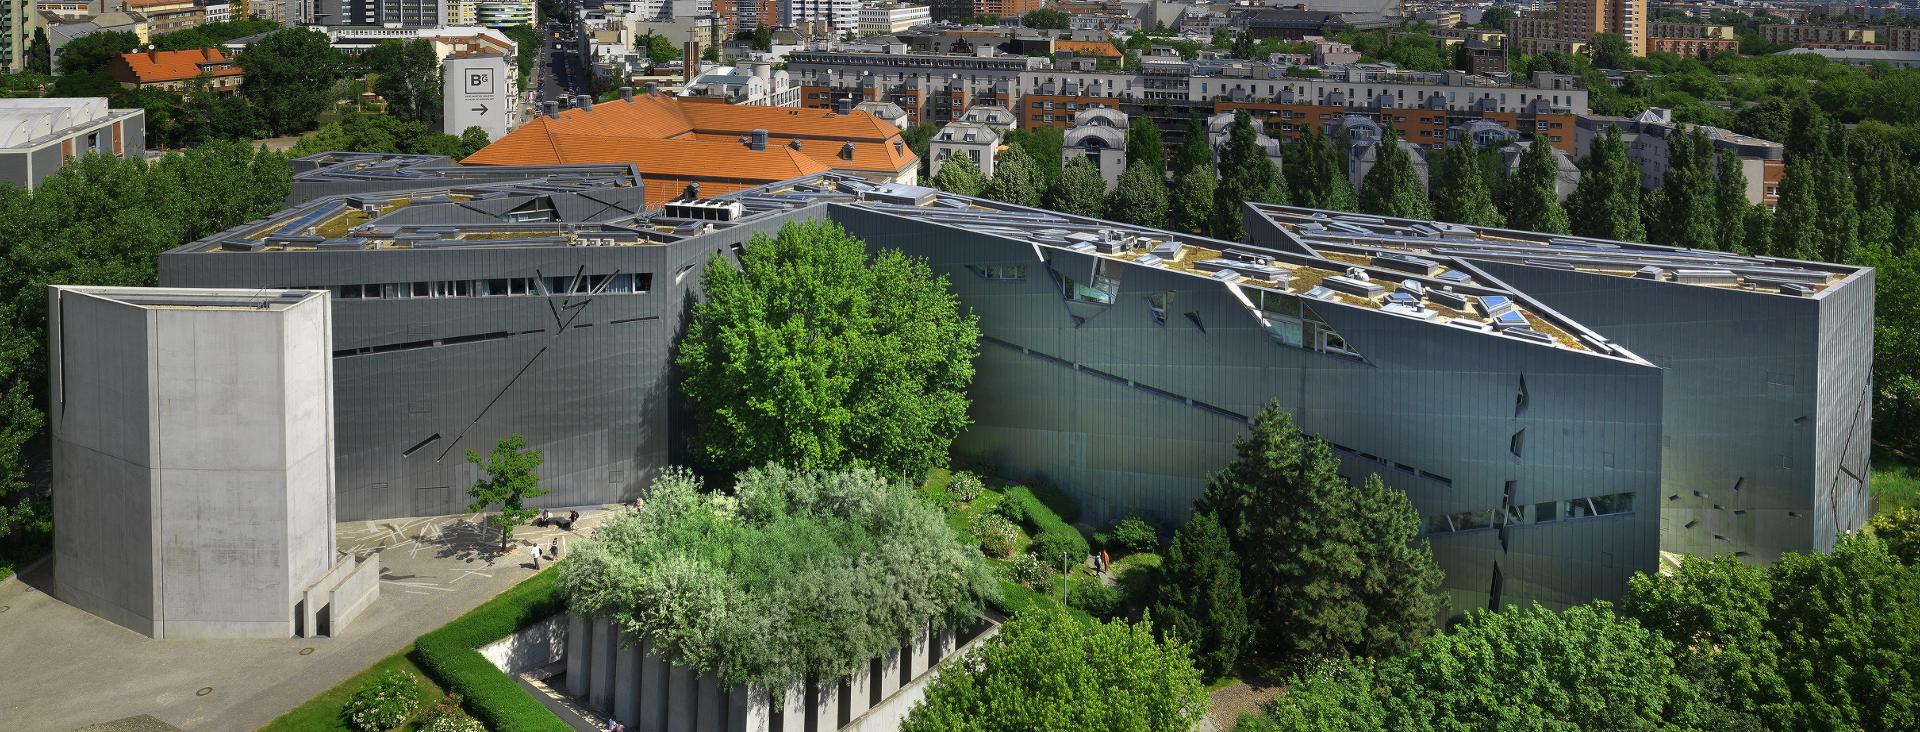 Libeskind building and garden of exile, photographed from bird's eye view